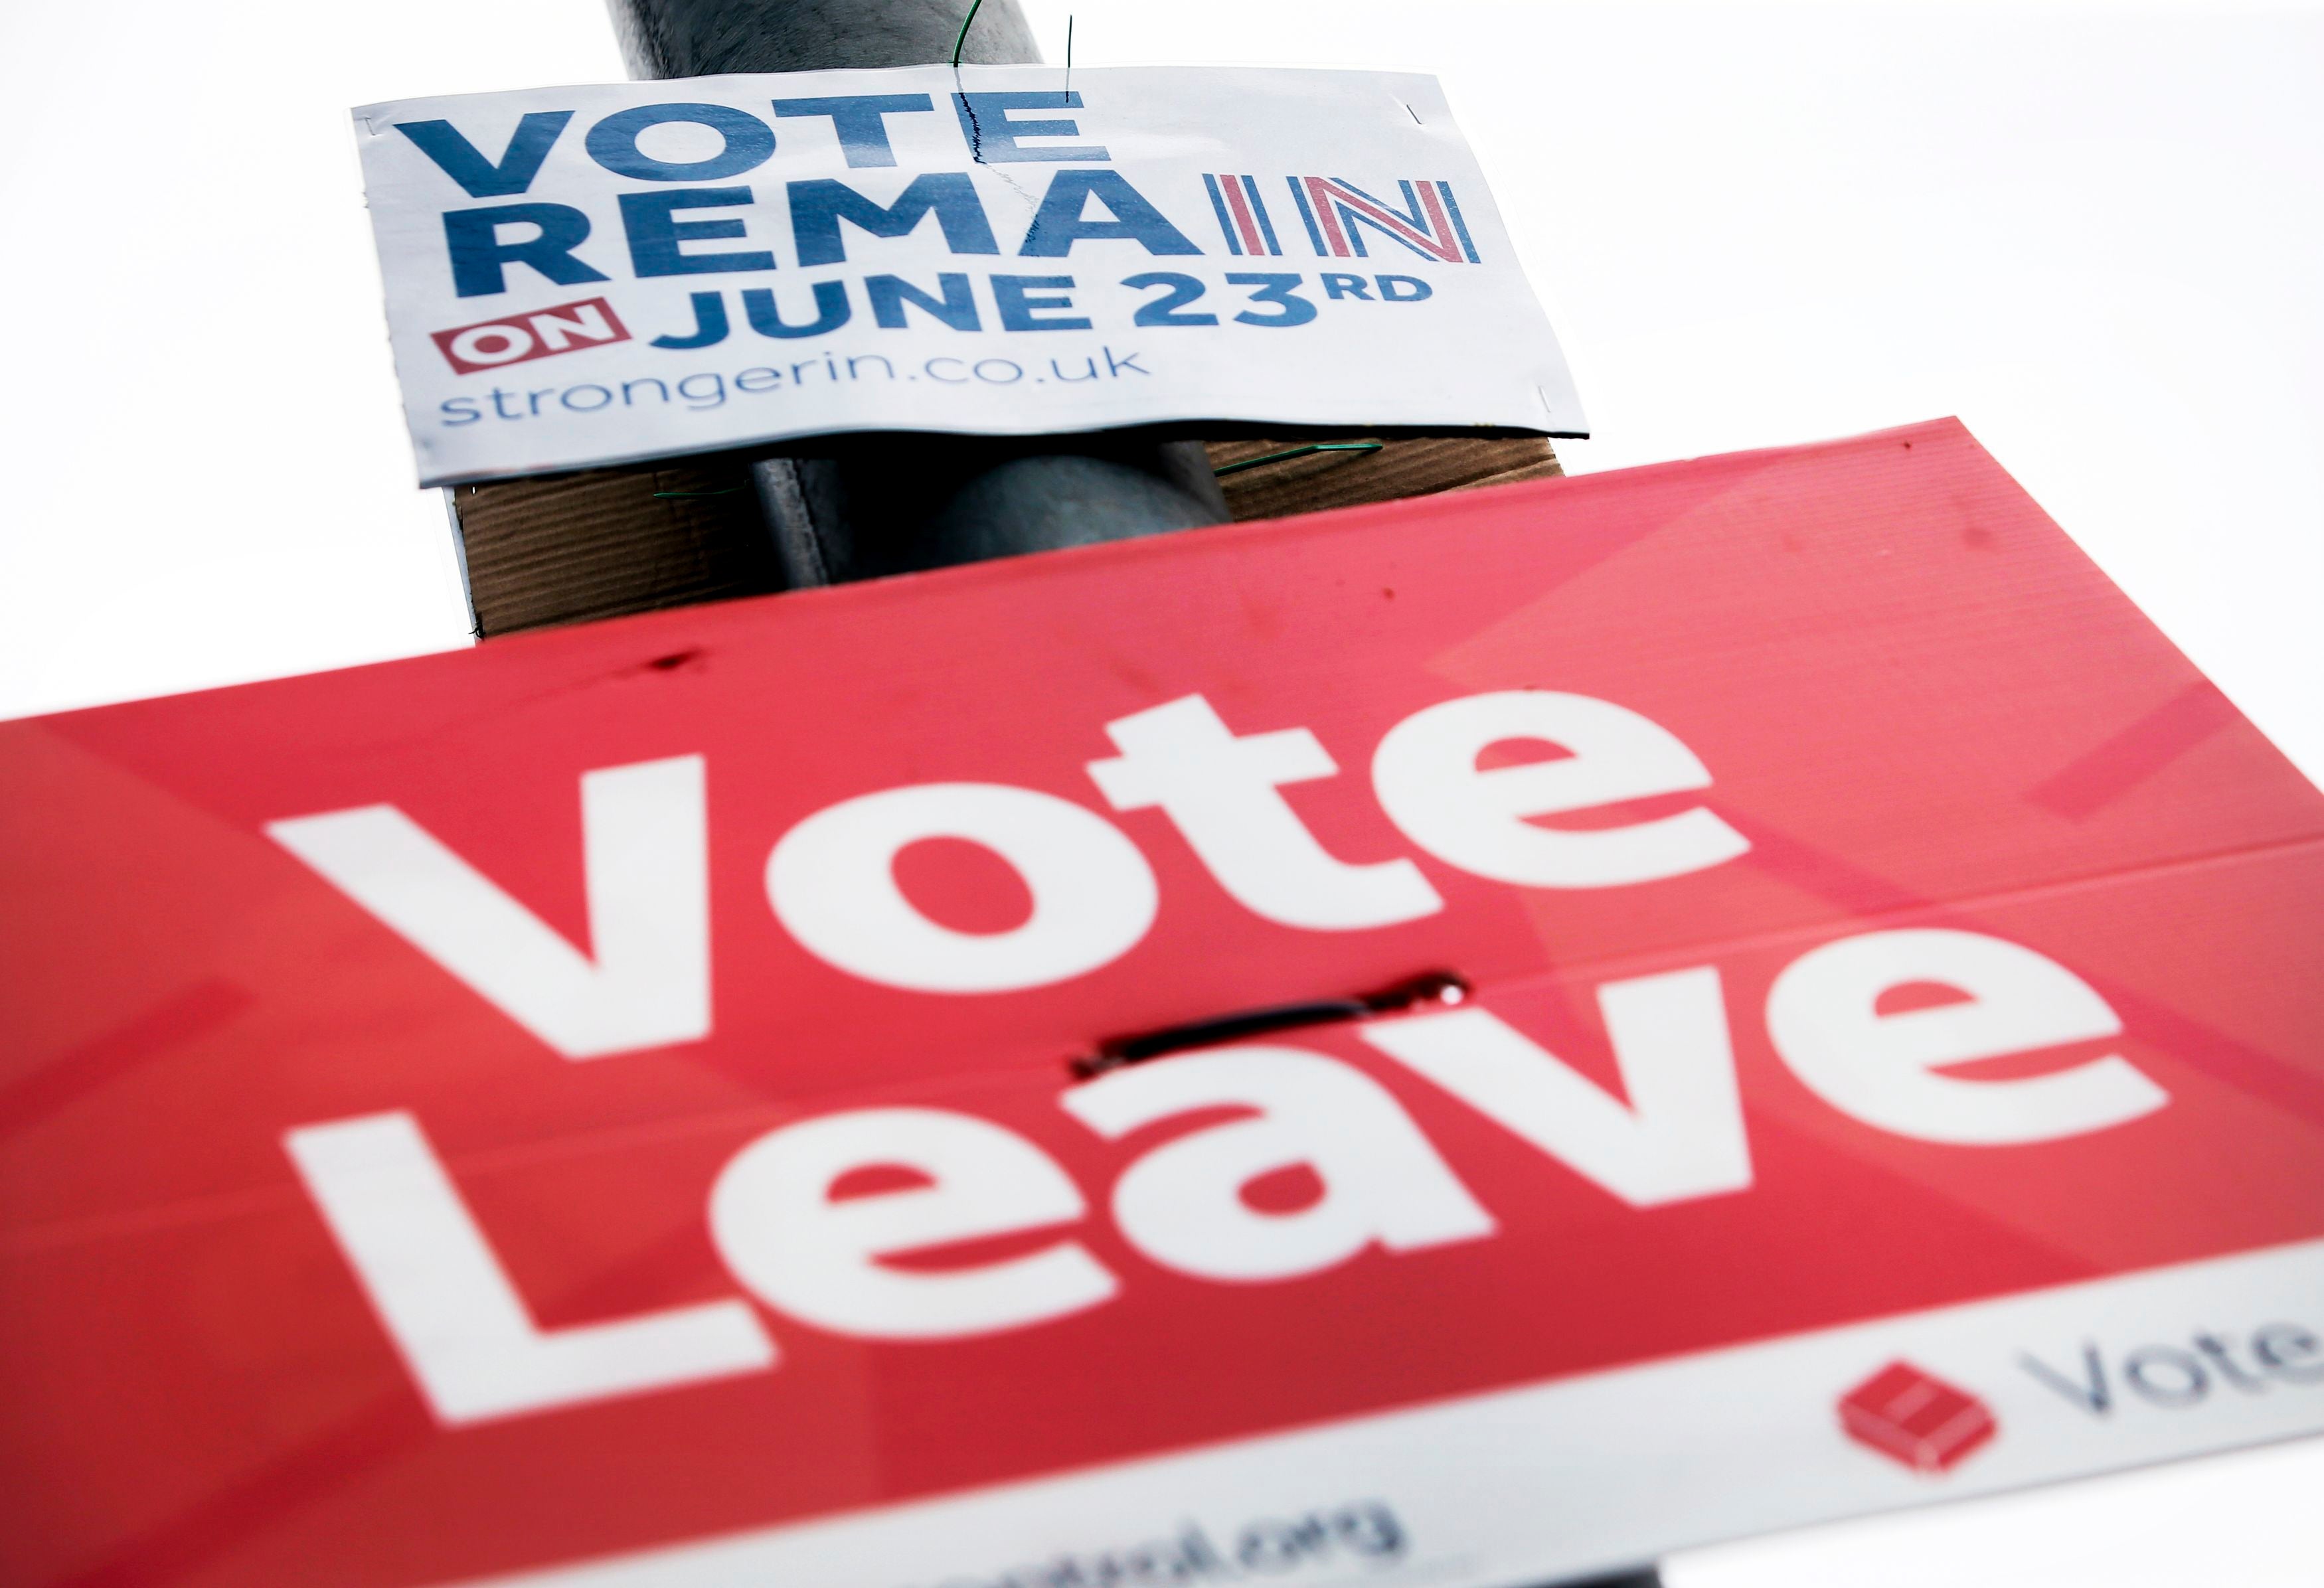 Vote Remain and Vote Leave signs on a lamp post in Leeds (PA)